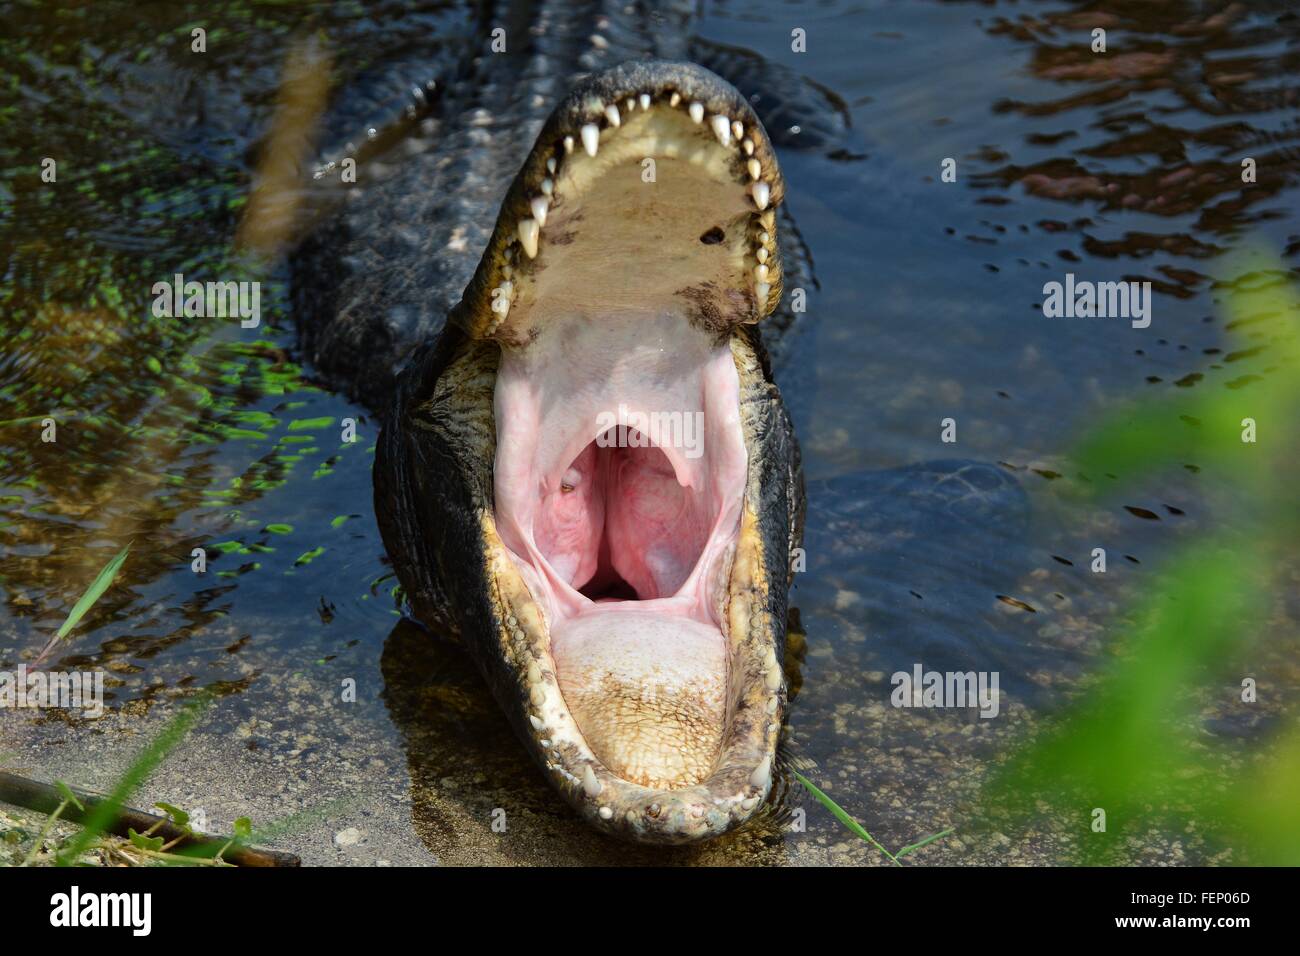 Crocodile With Open Mouth In River Stock Photo